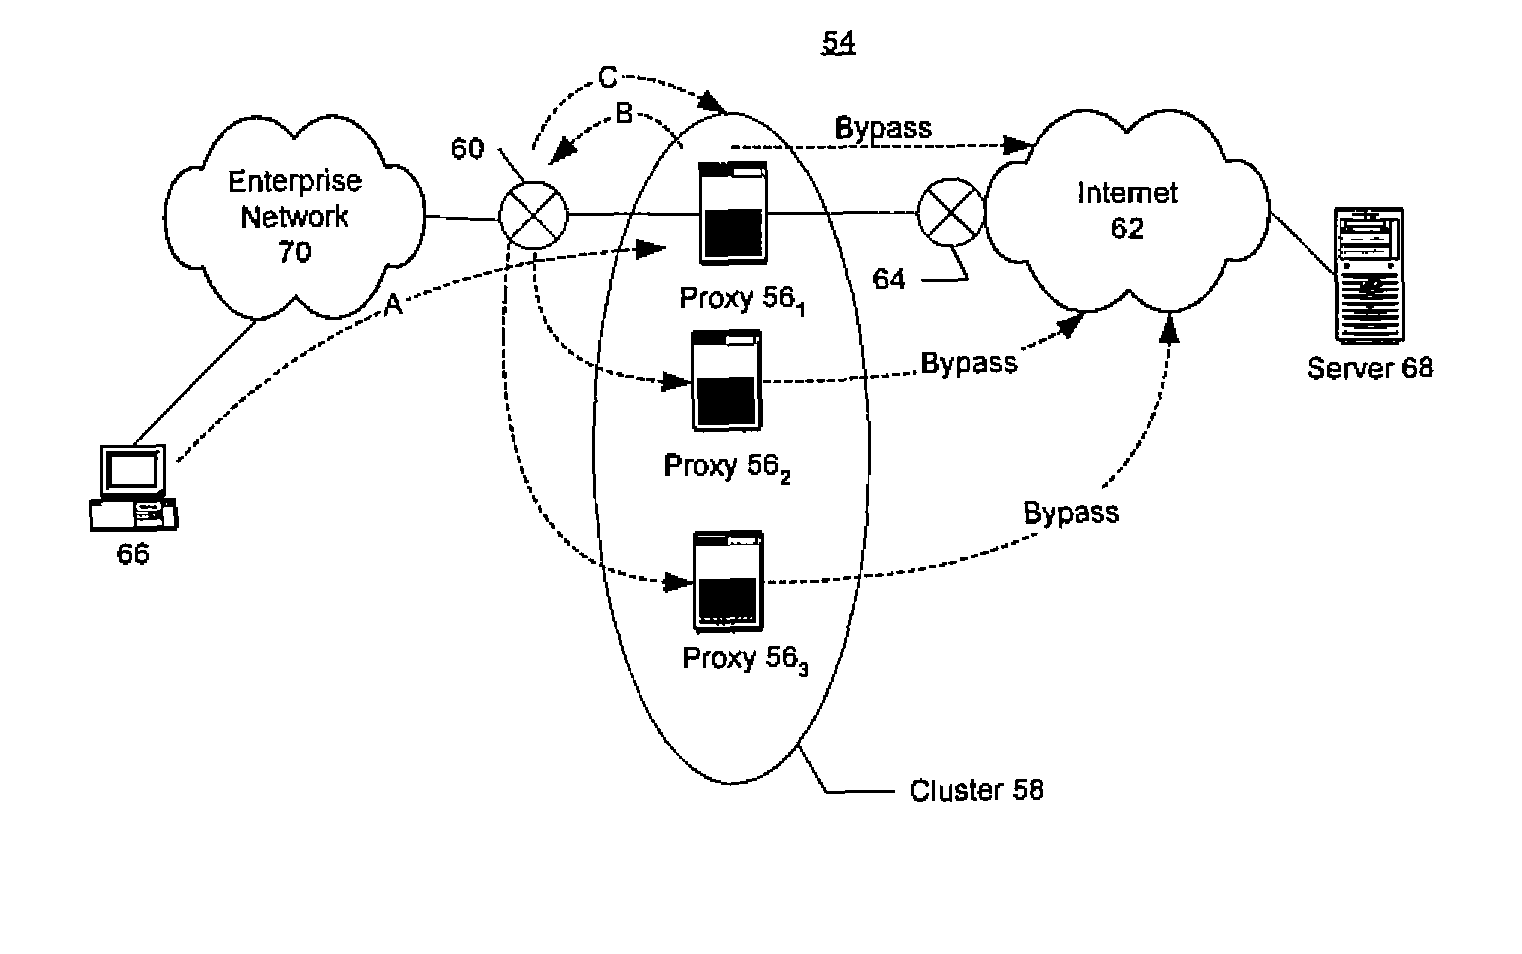 System and method of traffic inspection and stateful connection forwarding among geographically dispersed network appliances organized as clusters